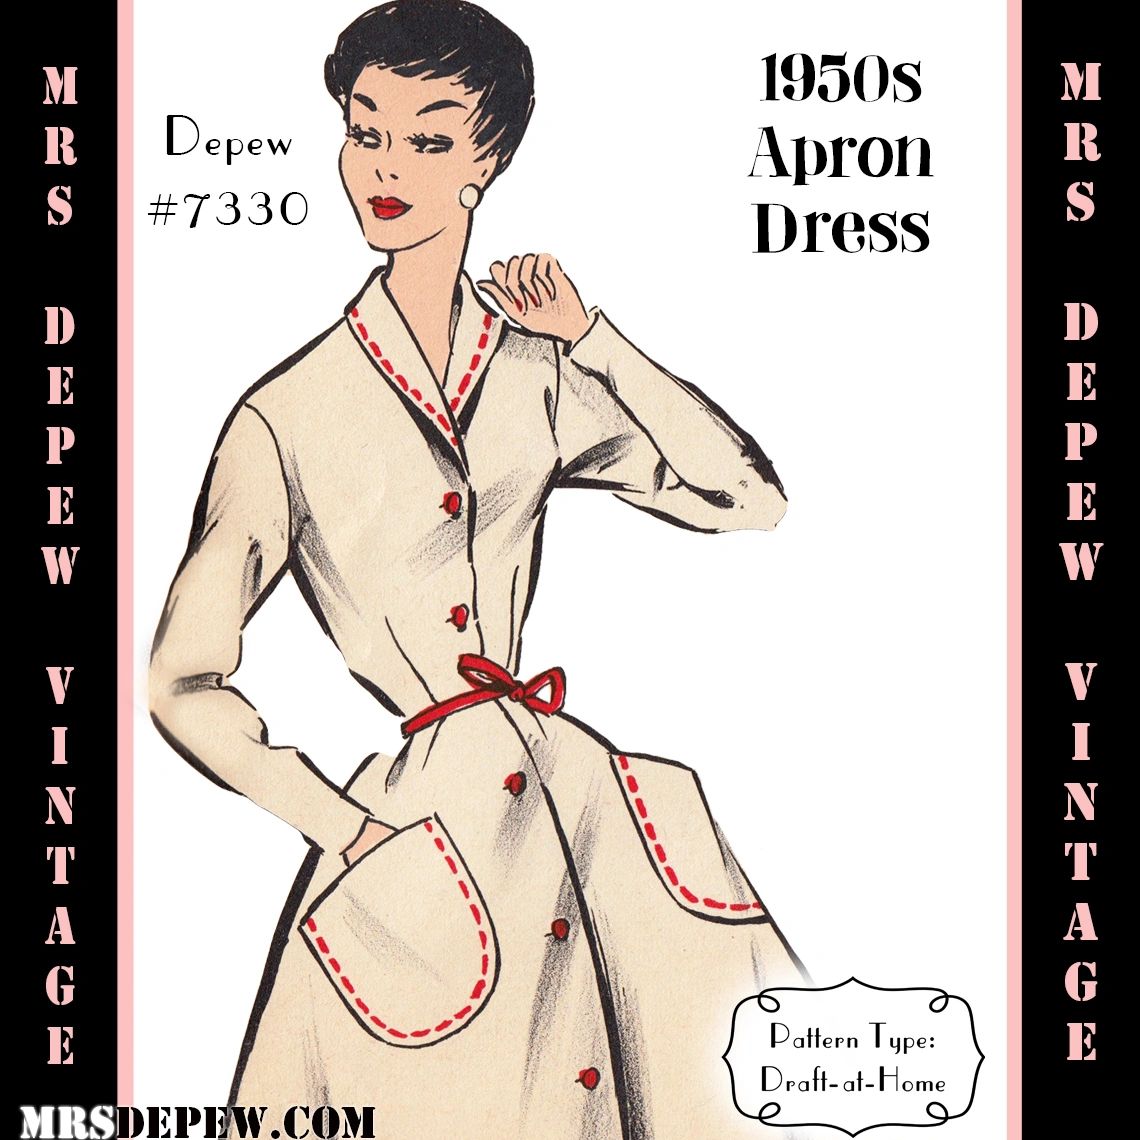 Vintage Sewing Pattern 1920s McCall 3684 Girl's Dress Size 8